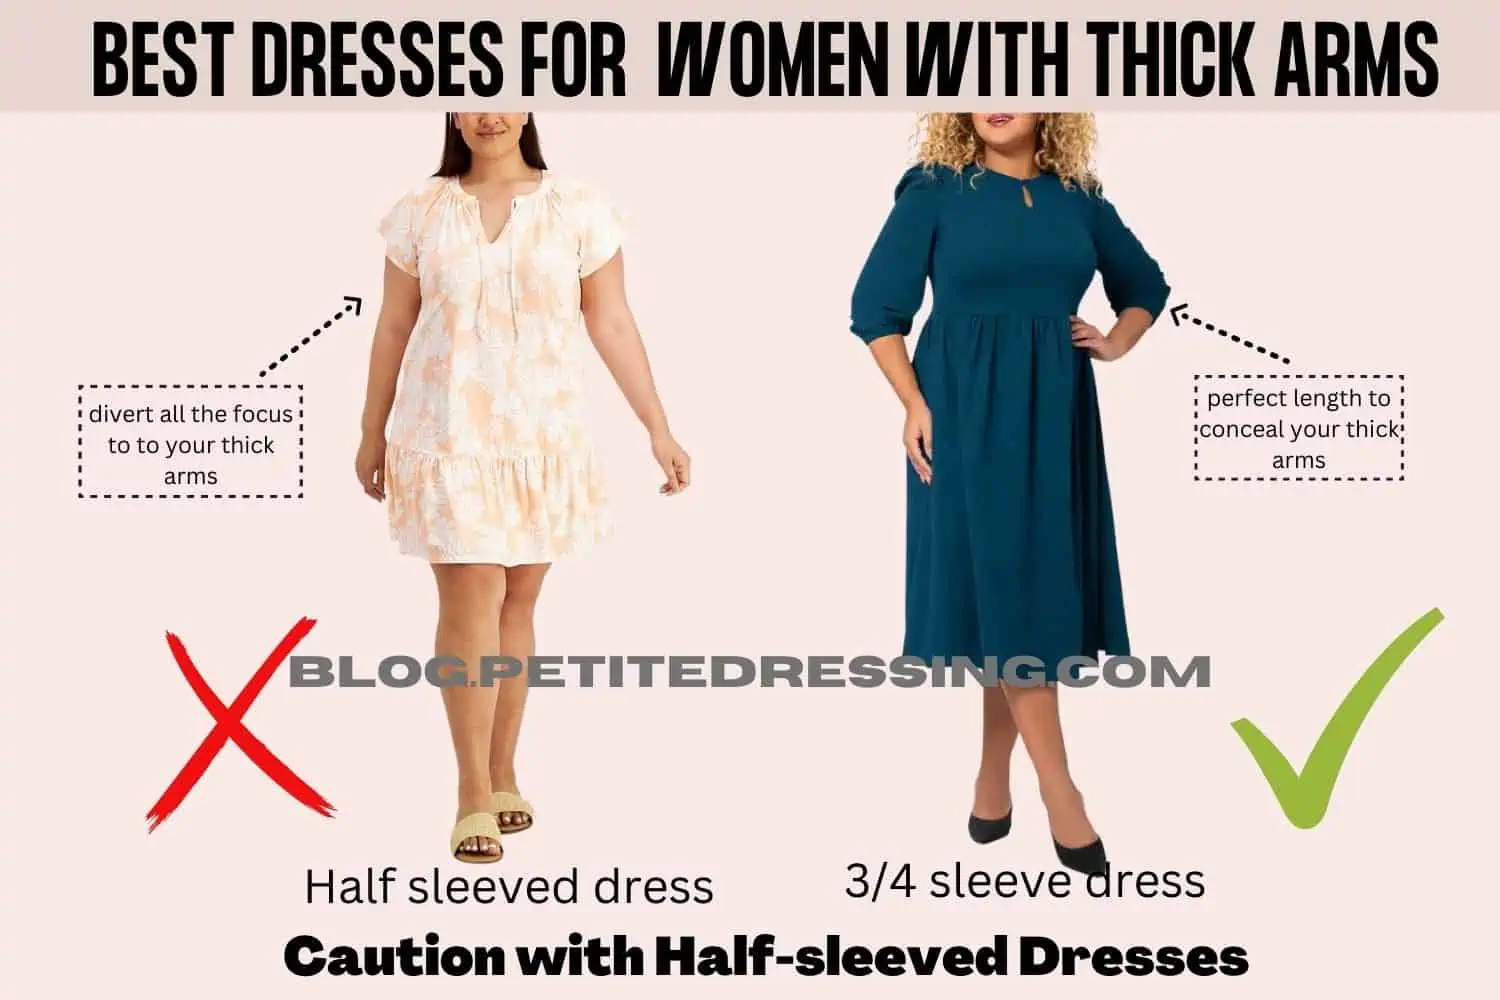 What Style Dresses Look Good On Women With Thick Arms? - Petite Dressing